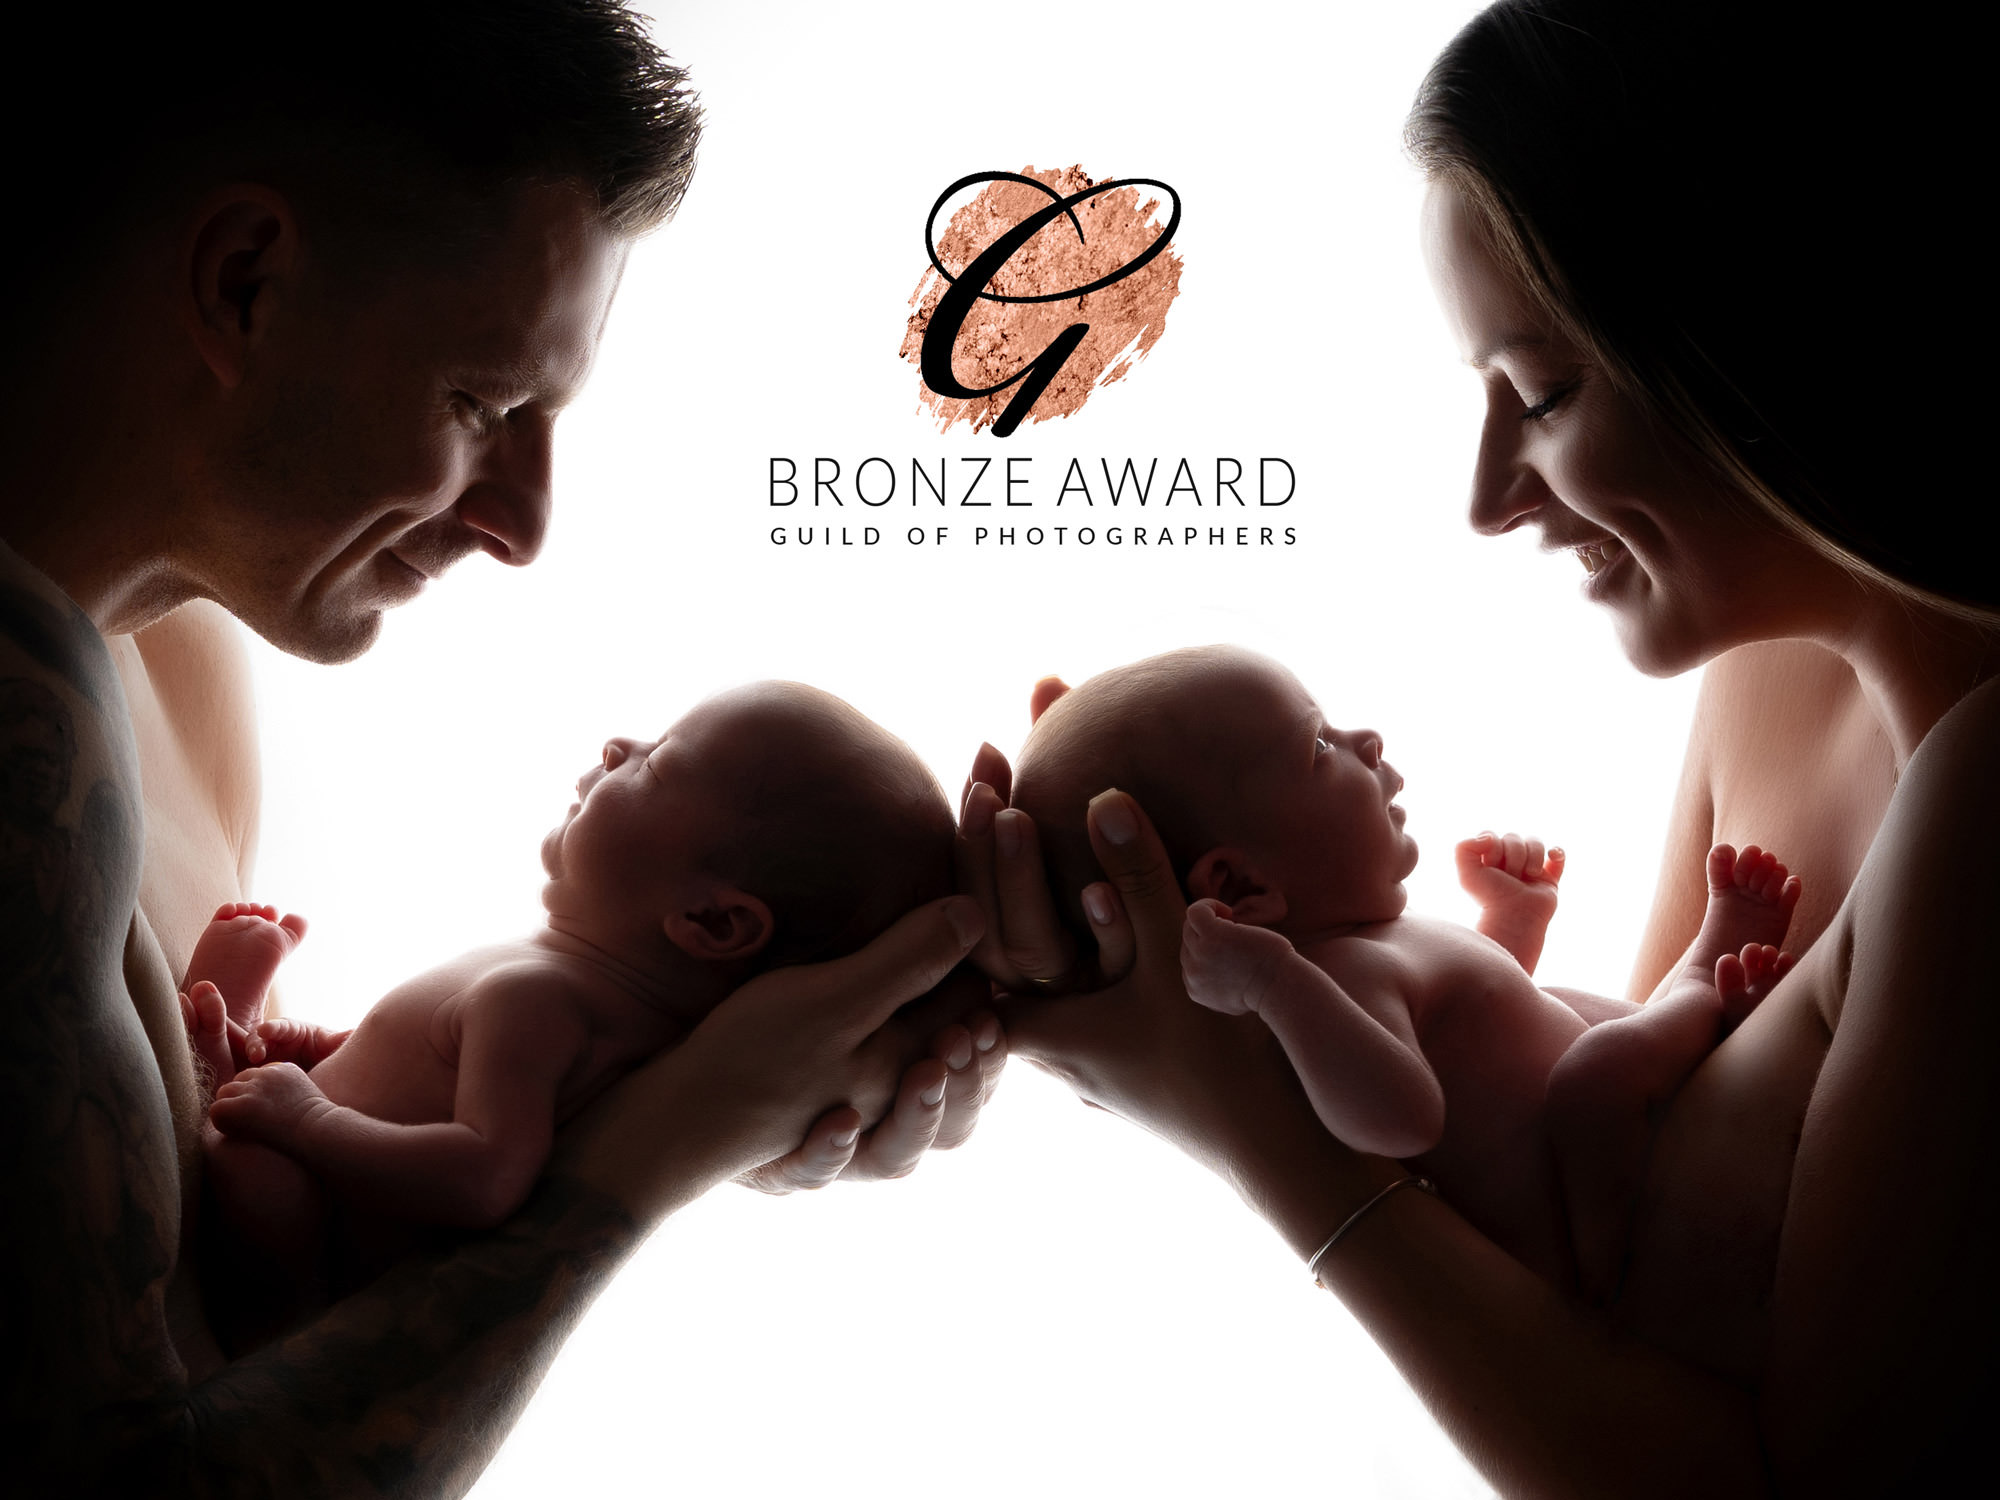 twin newborn babies photographed with parents by newborn photographer in Guildford, Surrey